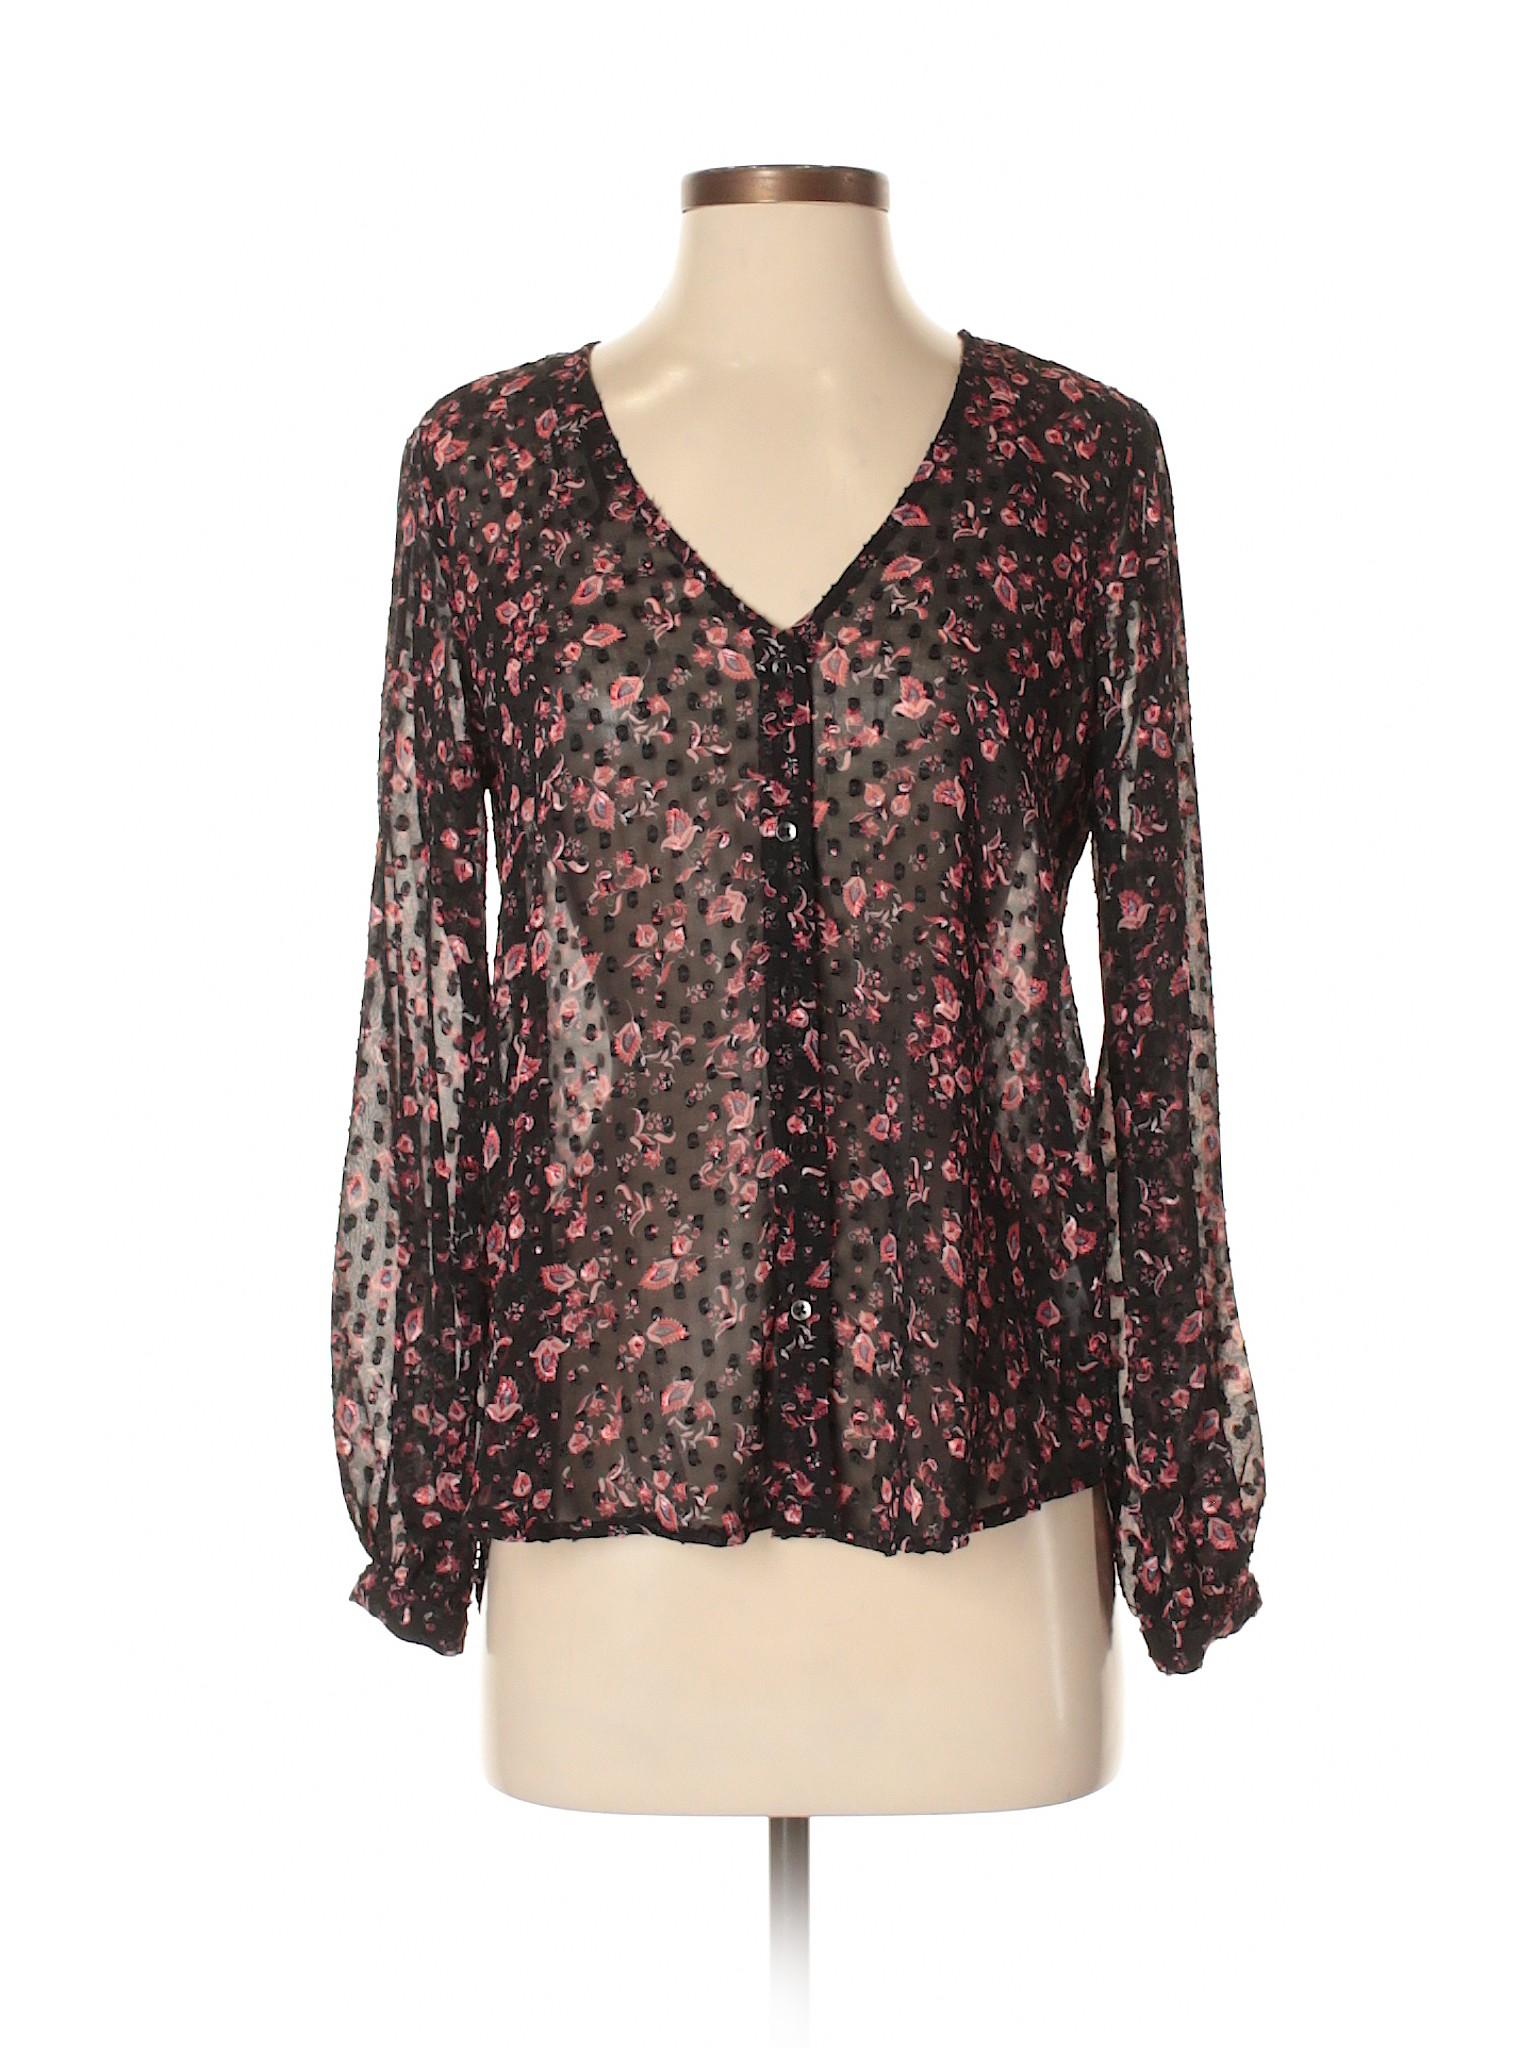 Jessica Simpson 100% Polyester Floral Black Long Sleeve Blouse Size XS ...